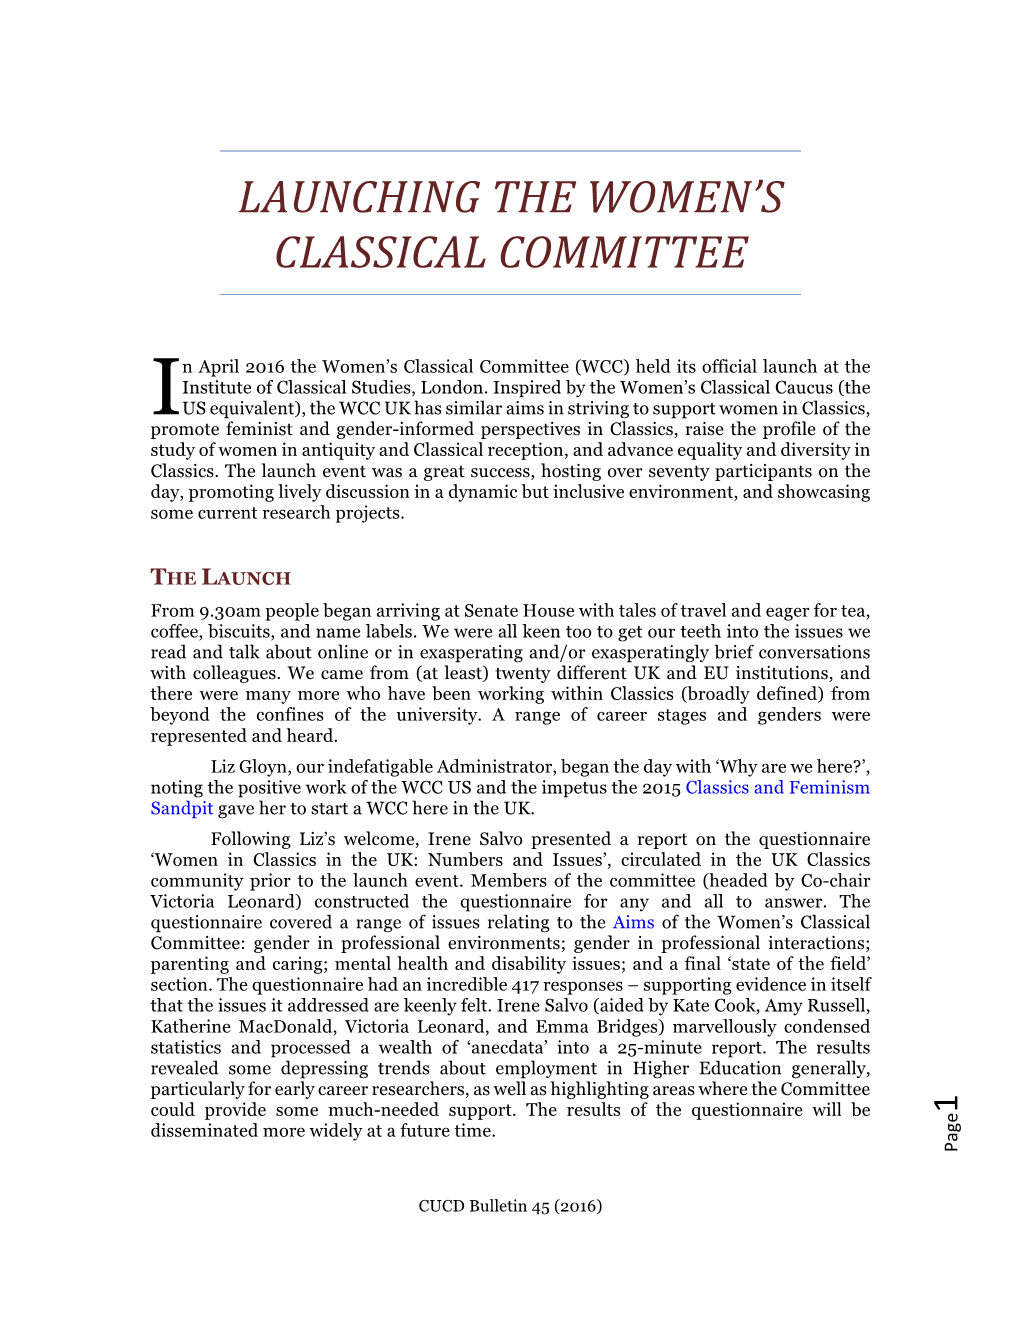 Launching the Women's Classical Committee